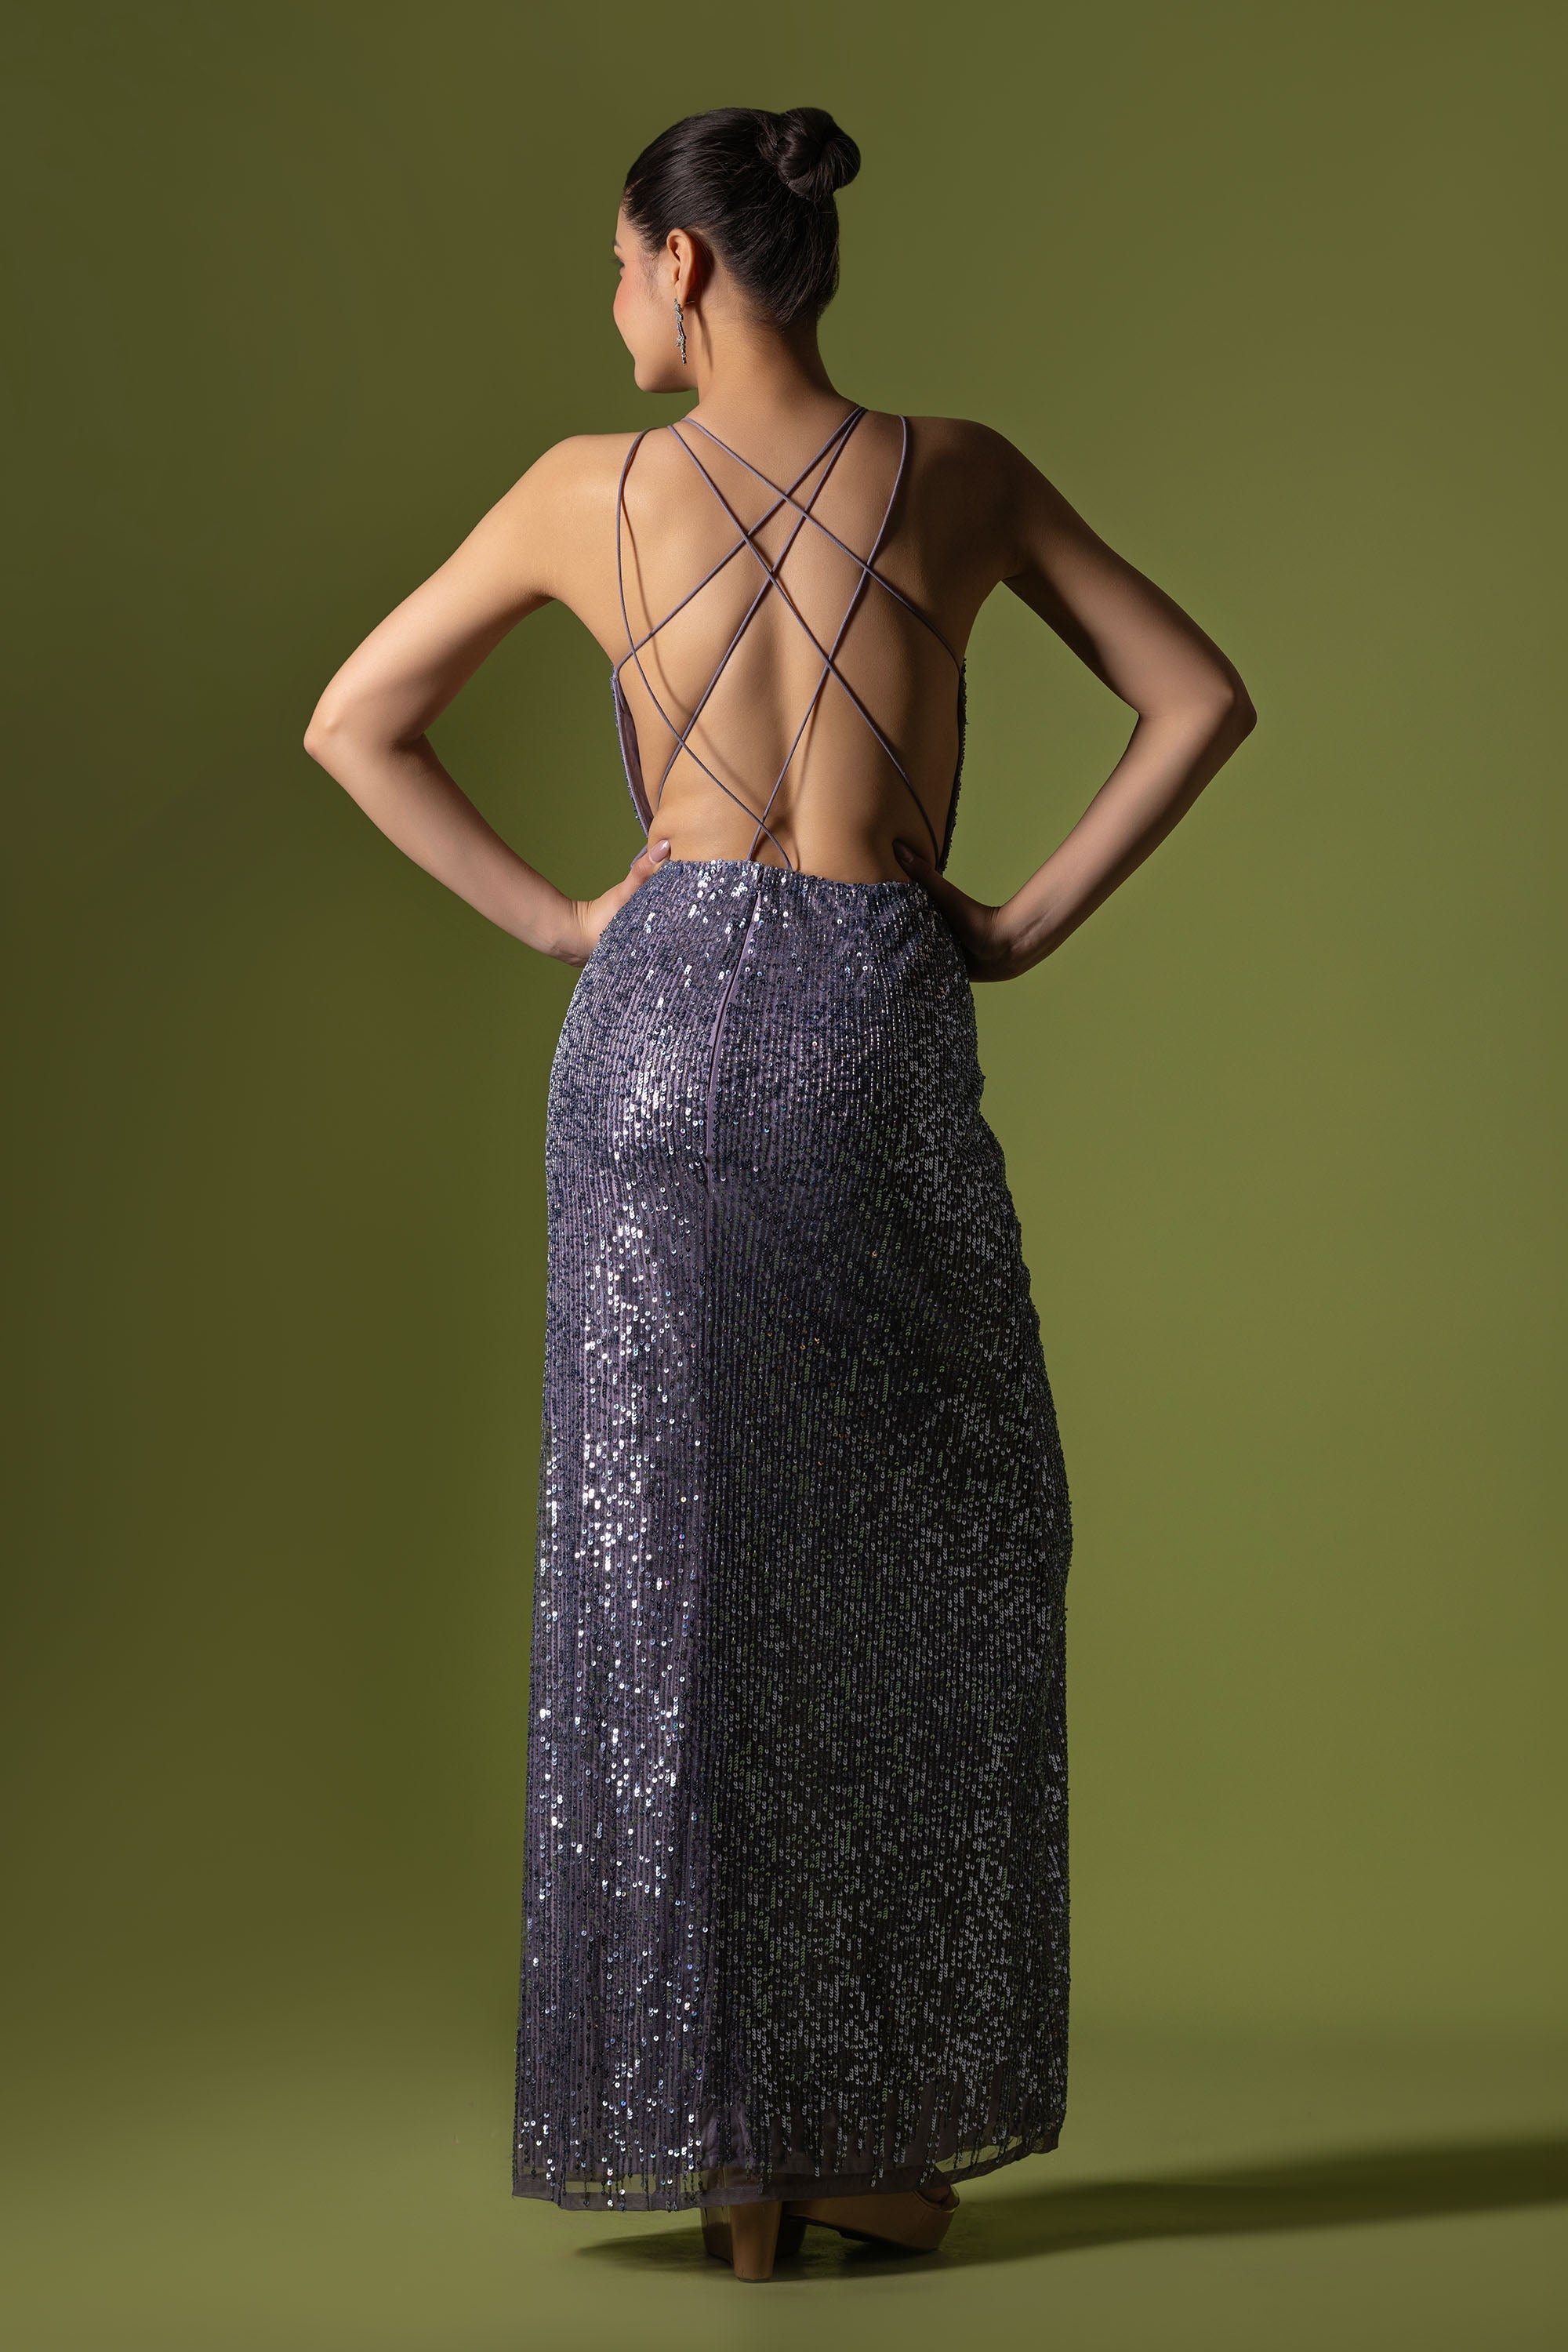 Net dress with sequins and cutdana